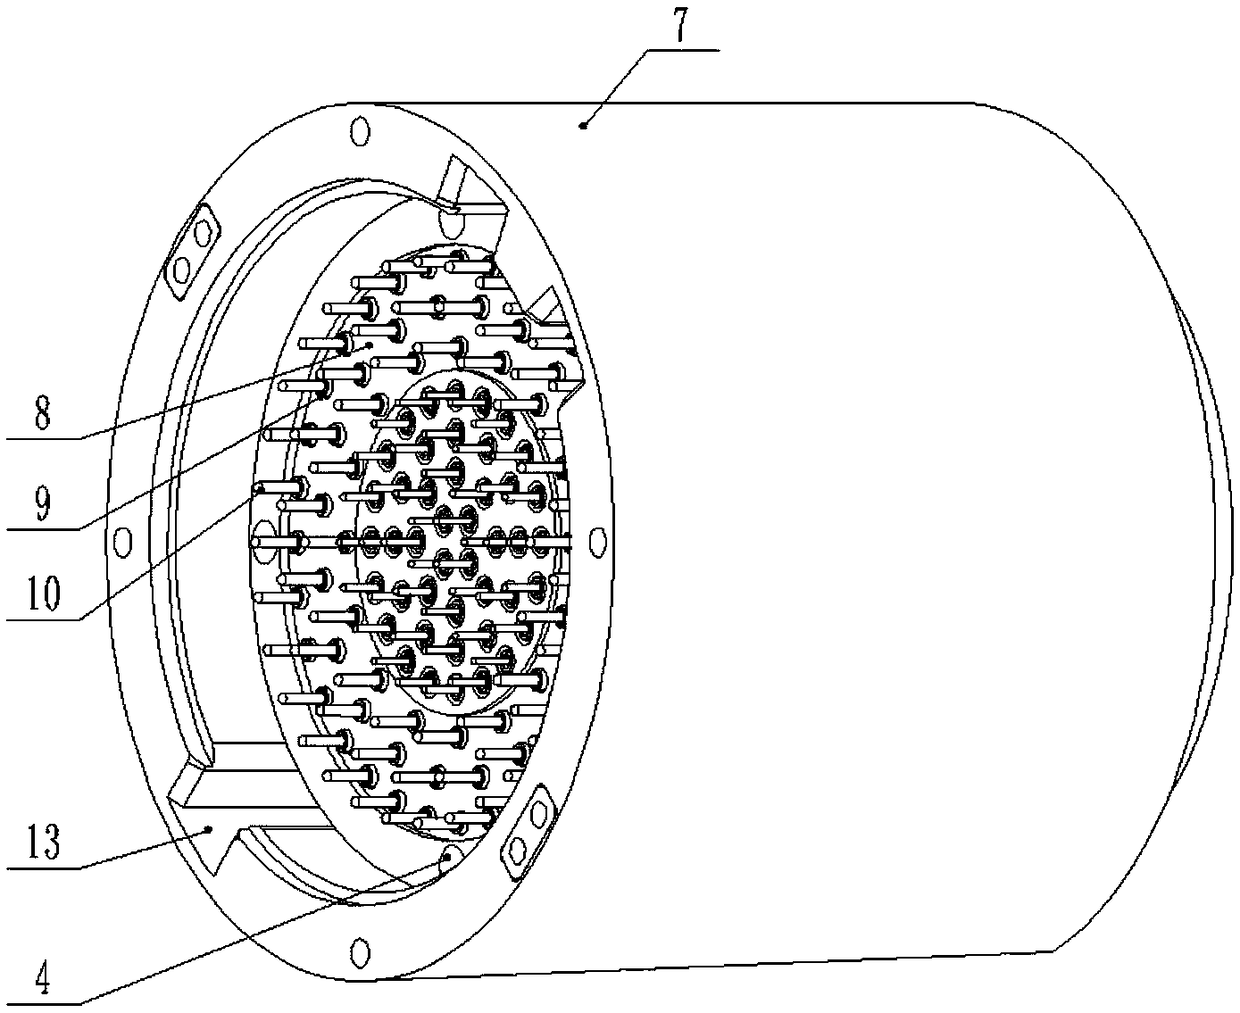 Novel butt joint structure of conductive slide ring